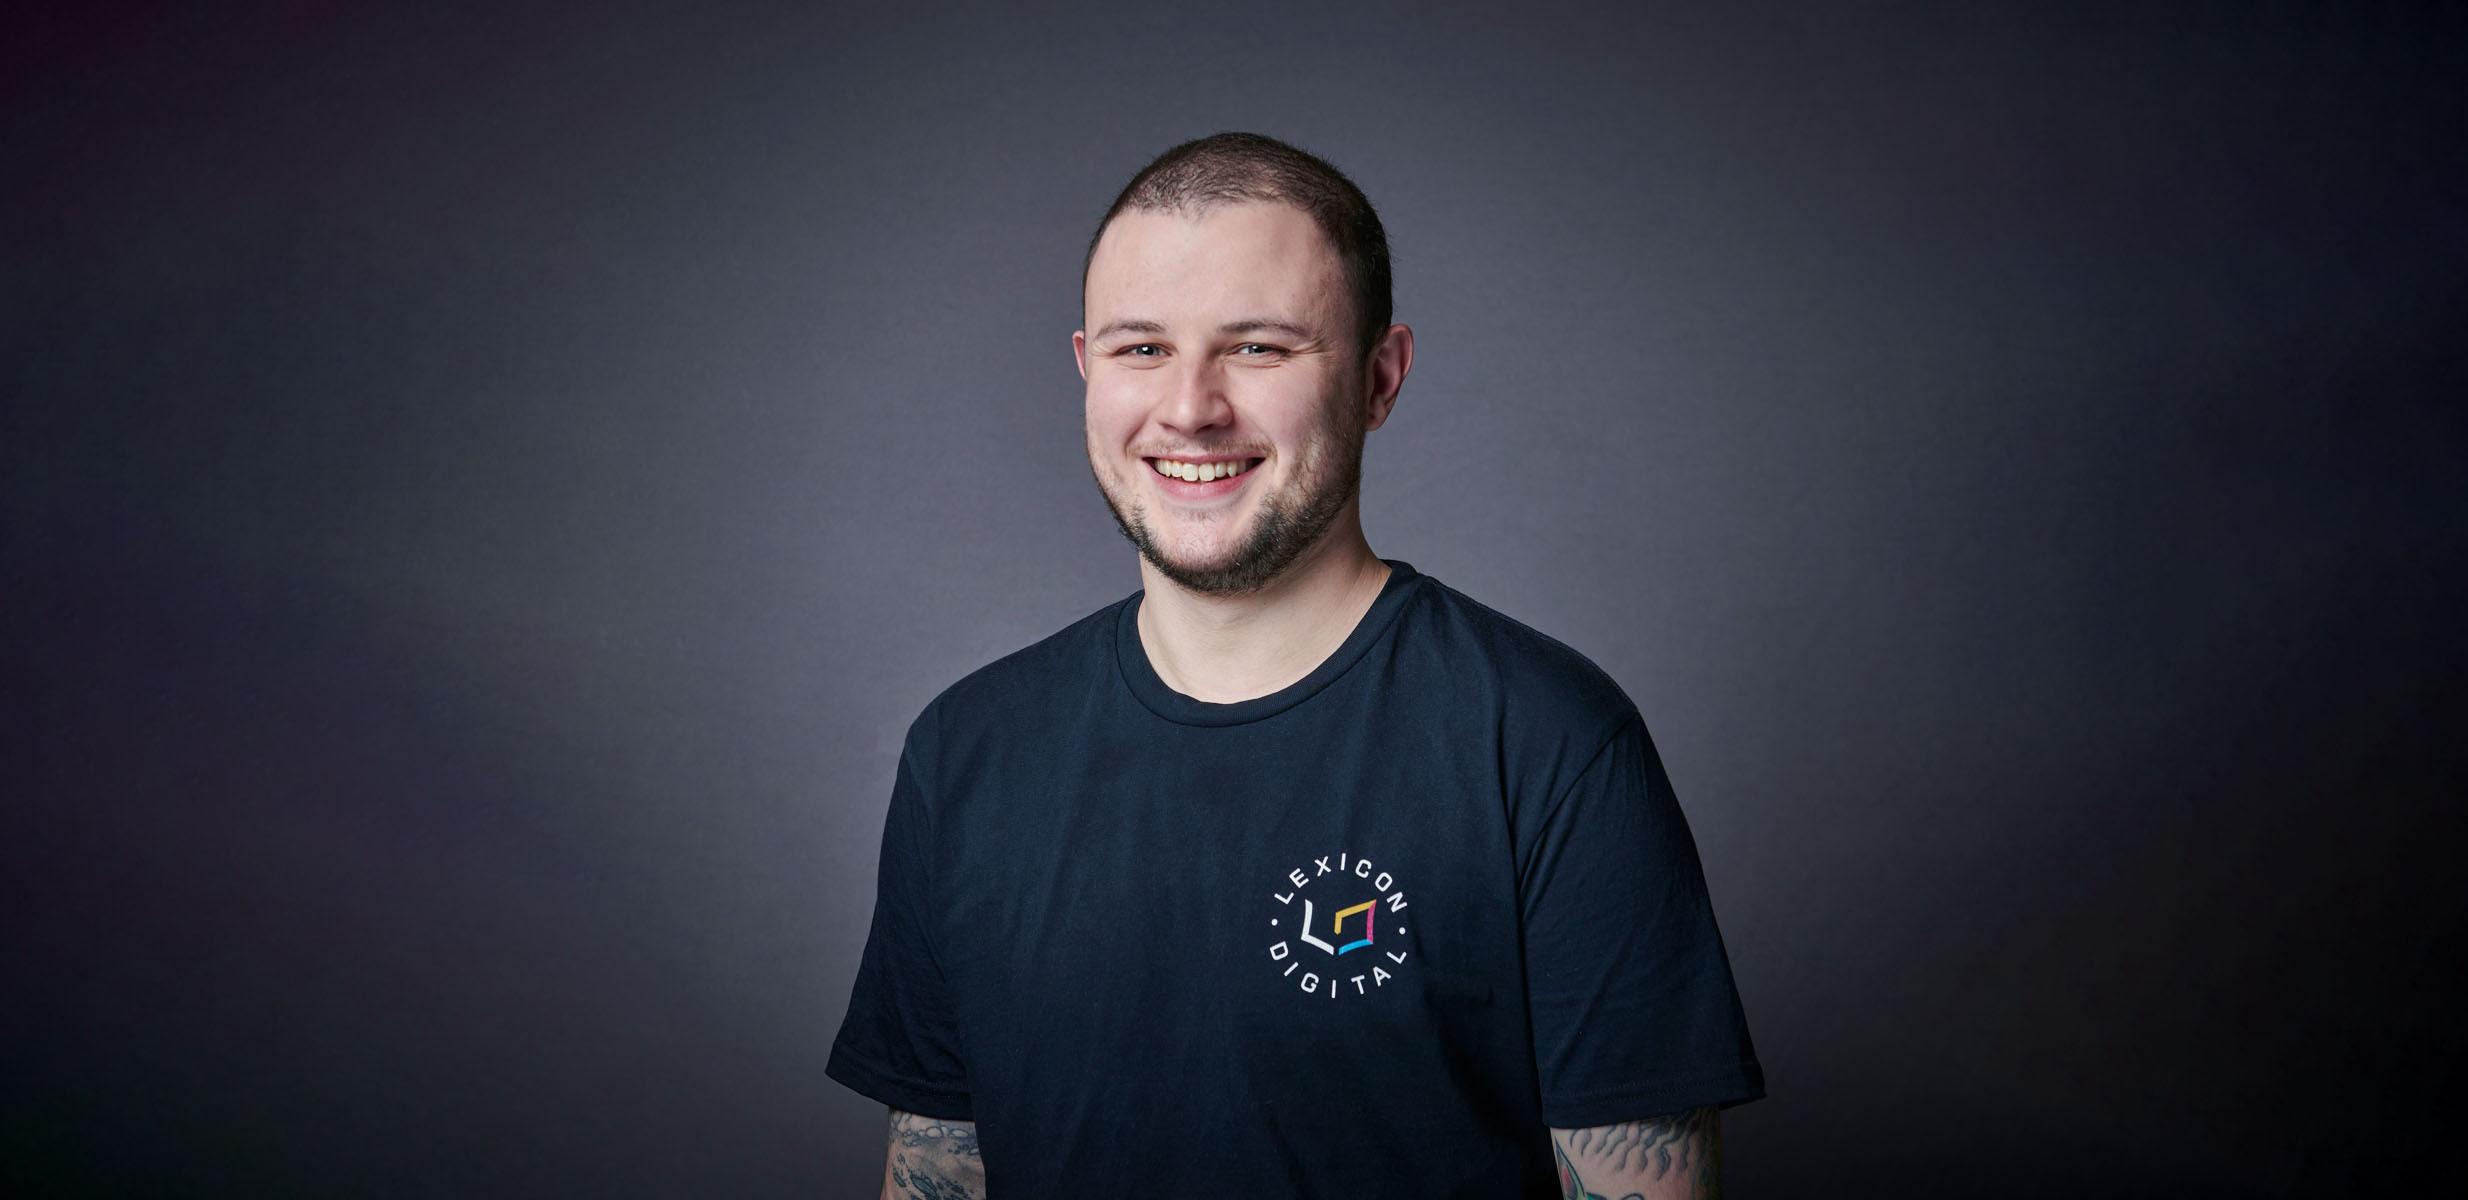 Meet Lee, our Technical Lead